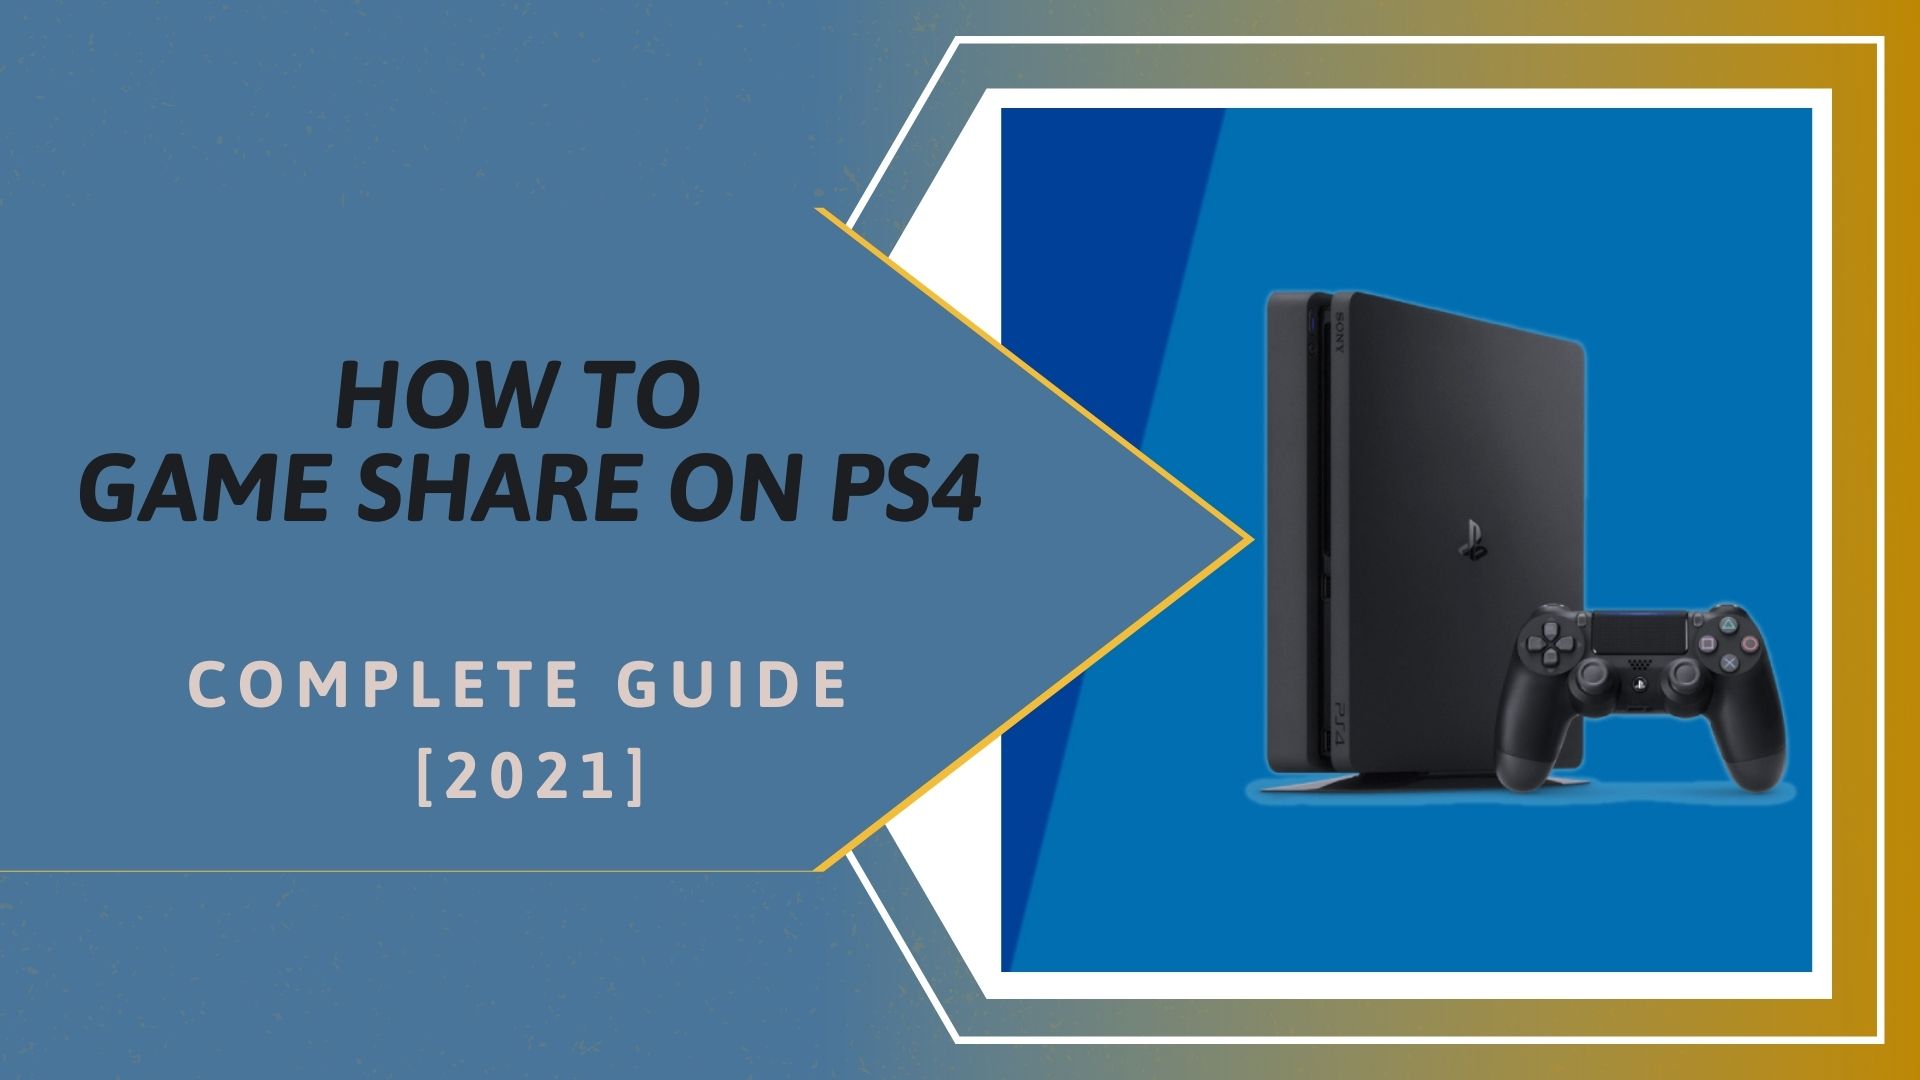 How To Game Share On PS4